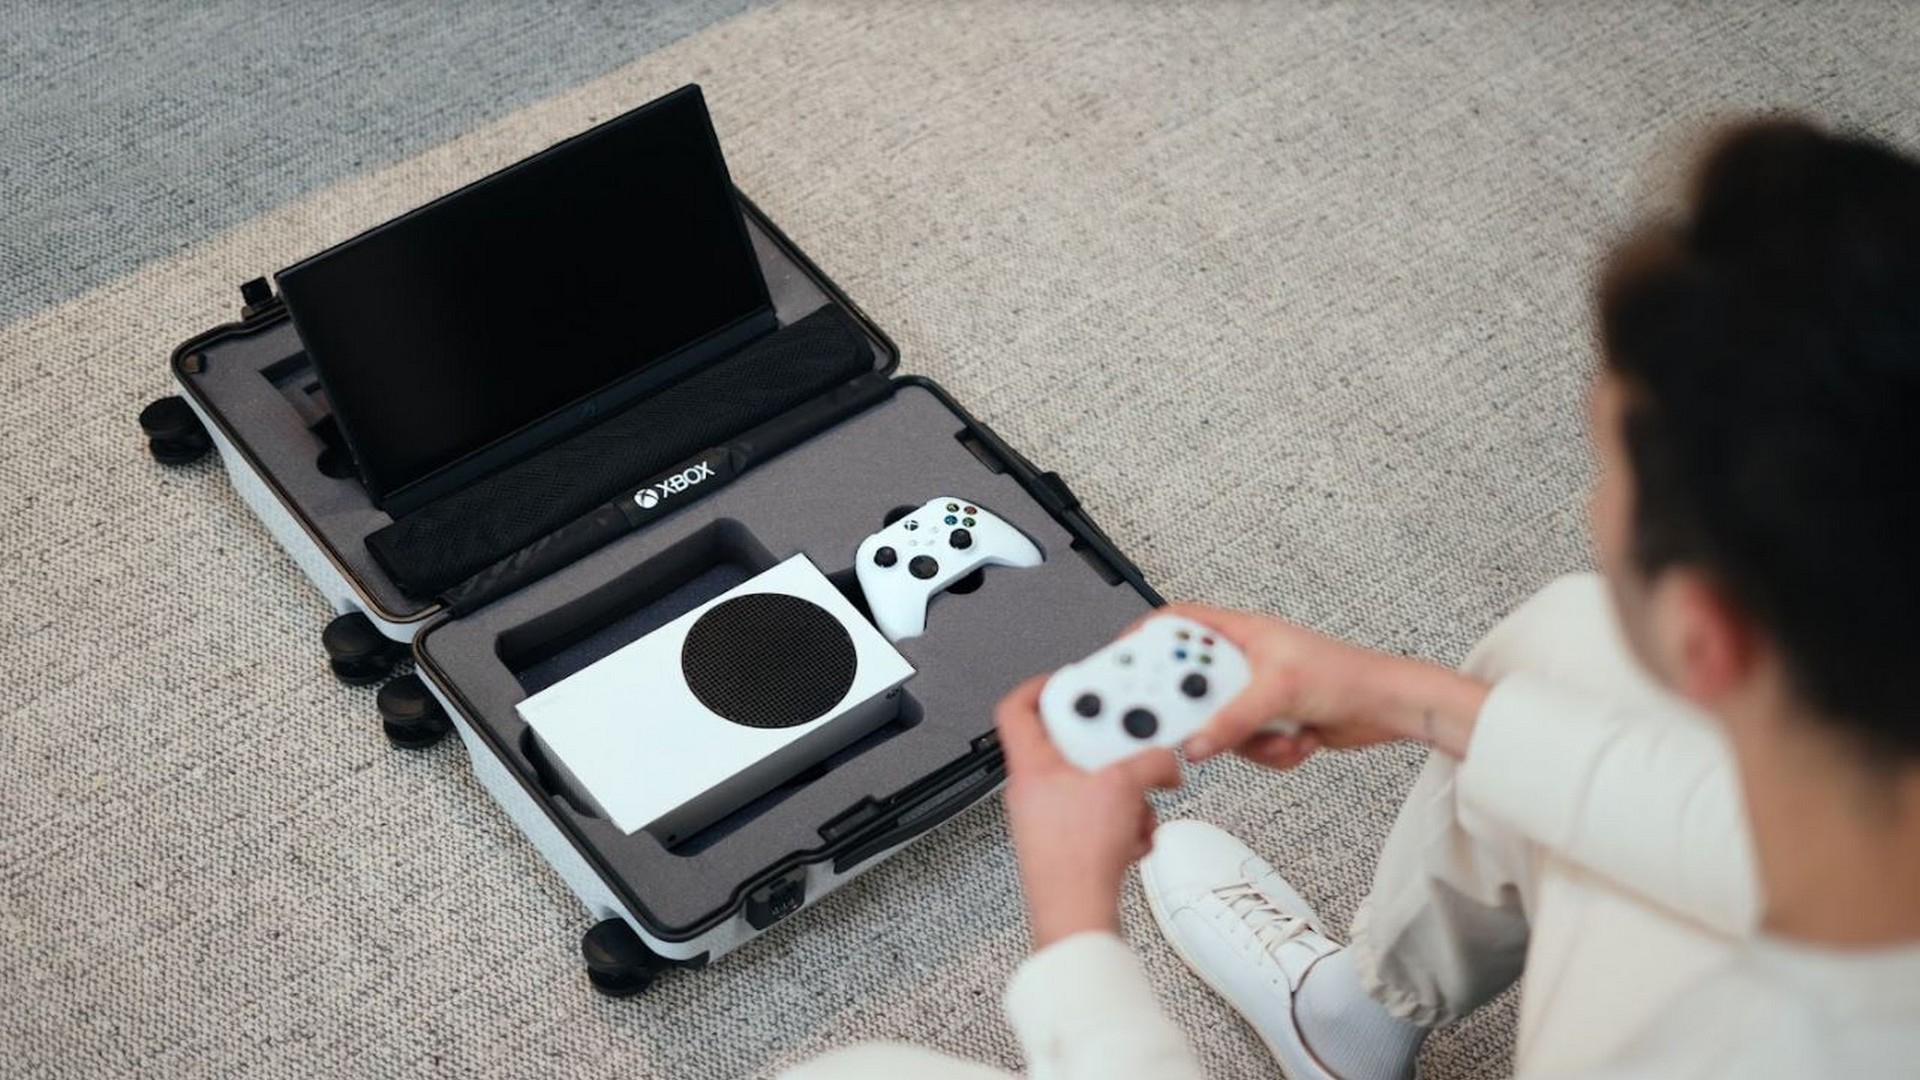 Xbox Celebrates Microsoft Flight Simulator On Console With The Ultimate Portable Gaming Hub